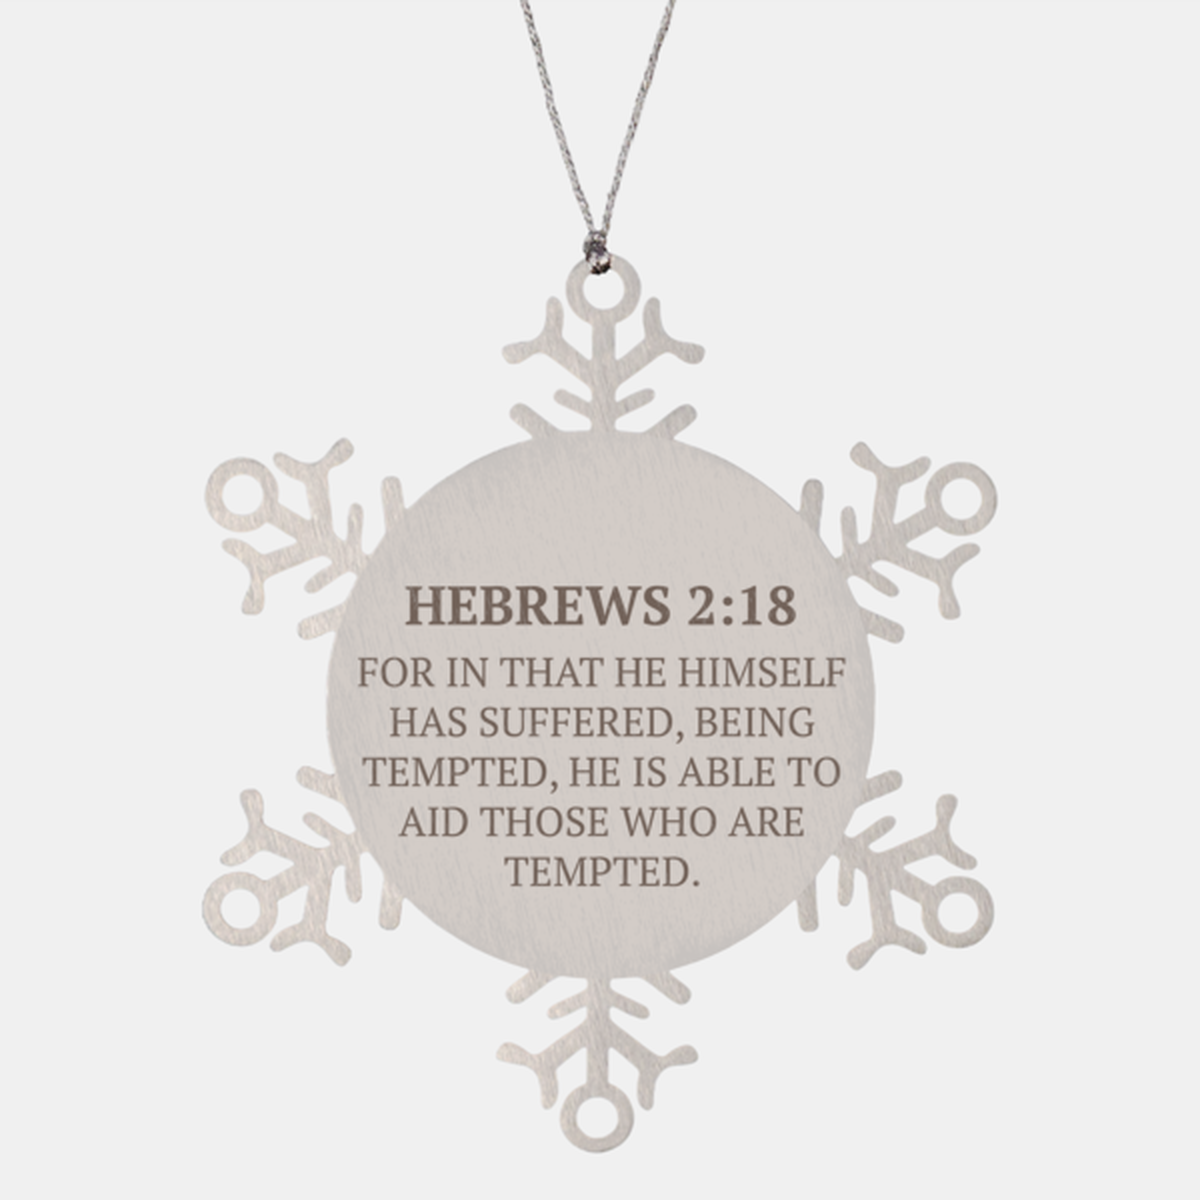 Christian Ornaments For Christmas Tree, For In That He Himself Has Suffered, Religious Christmas Decorations, Scripture Ornaments Gifts, Bible Verse Ornament